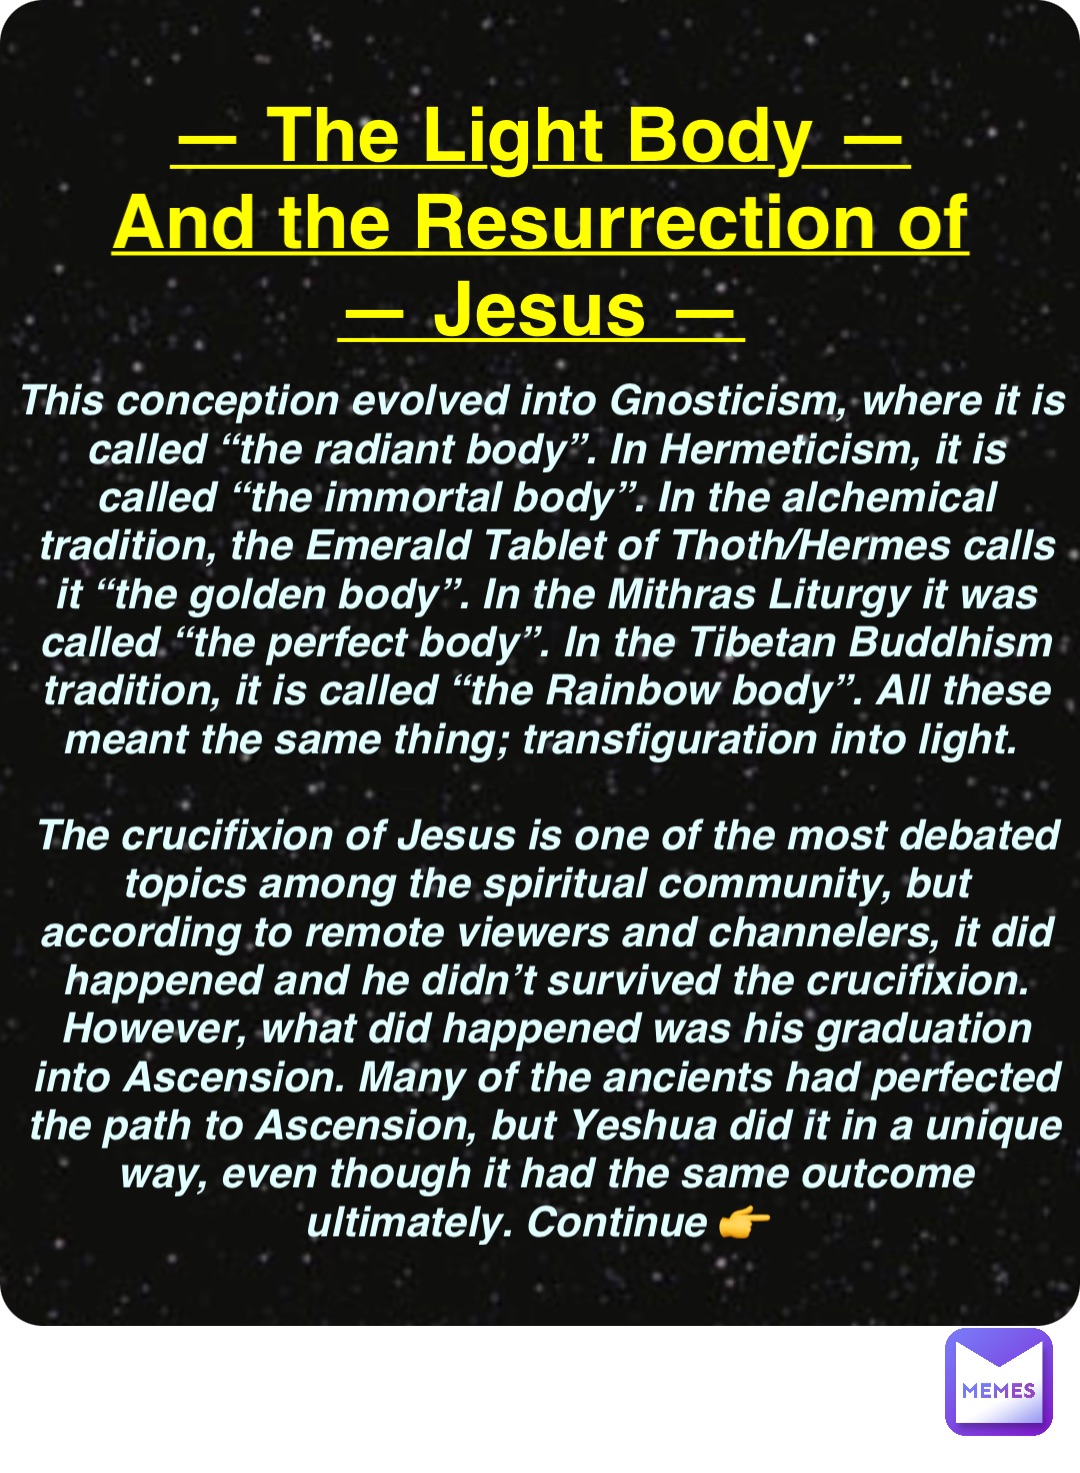 Double tap to edit — The Light Body —
And the Resurrection of
— Jesus — This conception evolved into Gnosticism, where it is called “the radiant body”. In Hermeticism, it is called “the immortal body”. In the alchemical tradition, the Emerald Tablet of Thoth/Hermes calls it “the golden body”. In the Mithras Liturgy it was called “the perfect body”. In the Tibetan Buddhism tradition, it is called “the Rainbow body”. All these meant the same thing; transfiguration into light.

The crucifixion of Jesus is one of the most debated topics among the spiritual community, but according to remote viewers and channelers, it did happened and he didn’t survived the crucifixion. However, what did happened was his graduation into Ascension. Many of the ancients had perfected the path to Ascension, but Yeshua did it in a unique way, even though it had the same outcome ultimately. Continue 👉